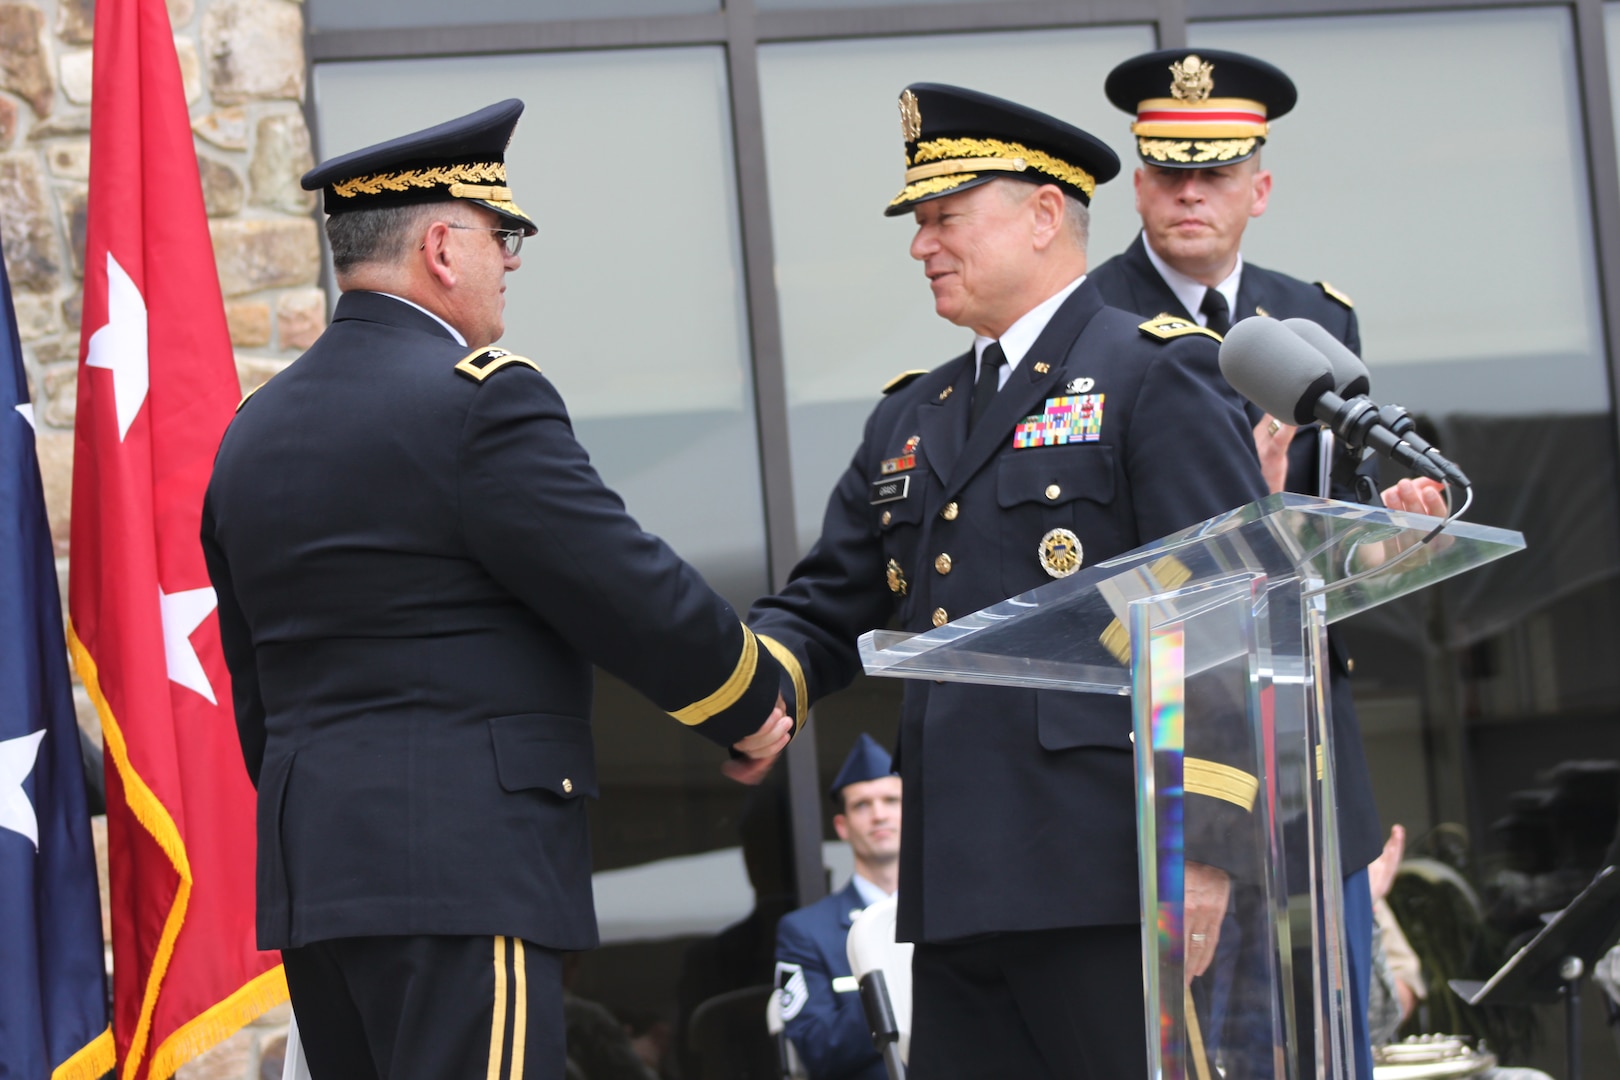 National Guard Bureau Chief, Gen. Frank Grass, was on hand to help officially open the Guard’s newest Armed Forces Reserve Center on Aug. 1, 2014 in New Castle, Del.  He is greeted by Maj. Gen. Frank Vavala, Delaware's adjutant general.